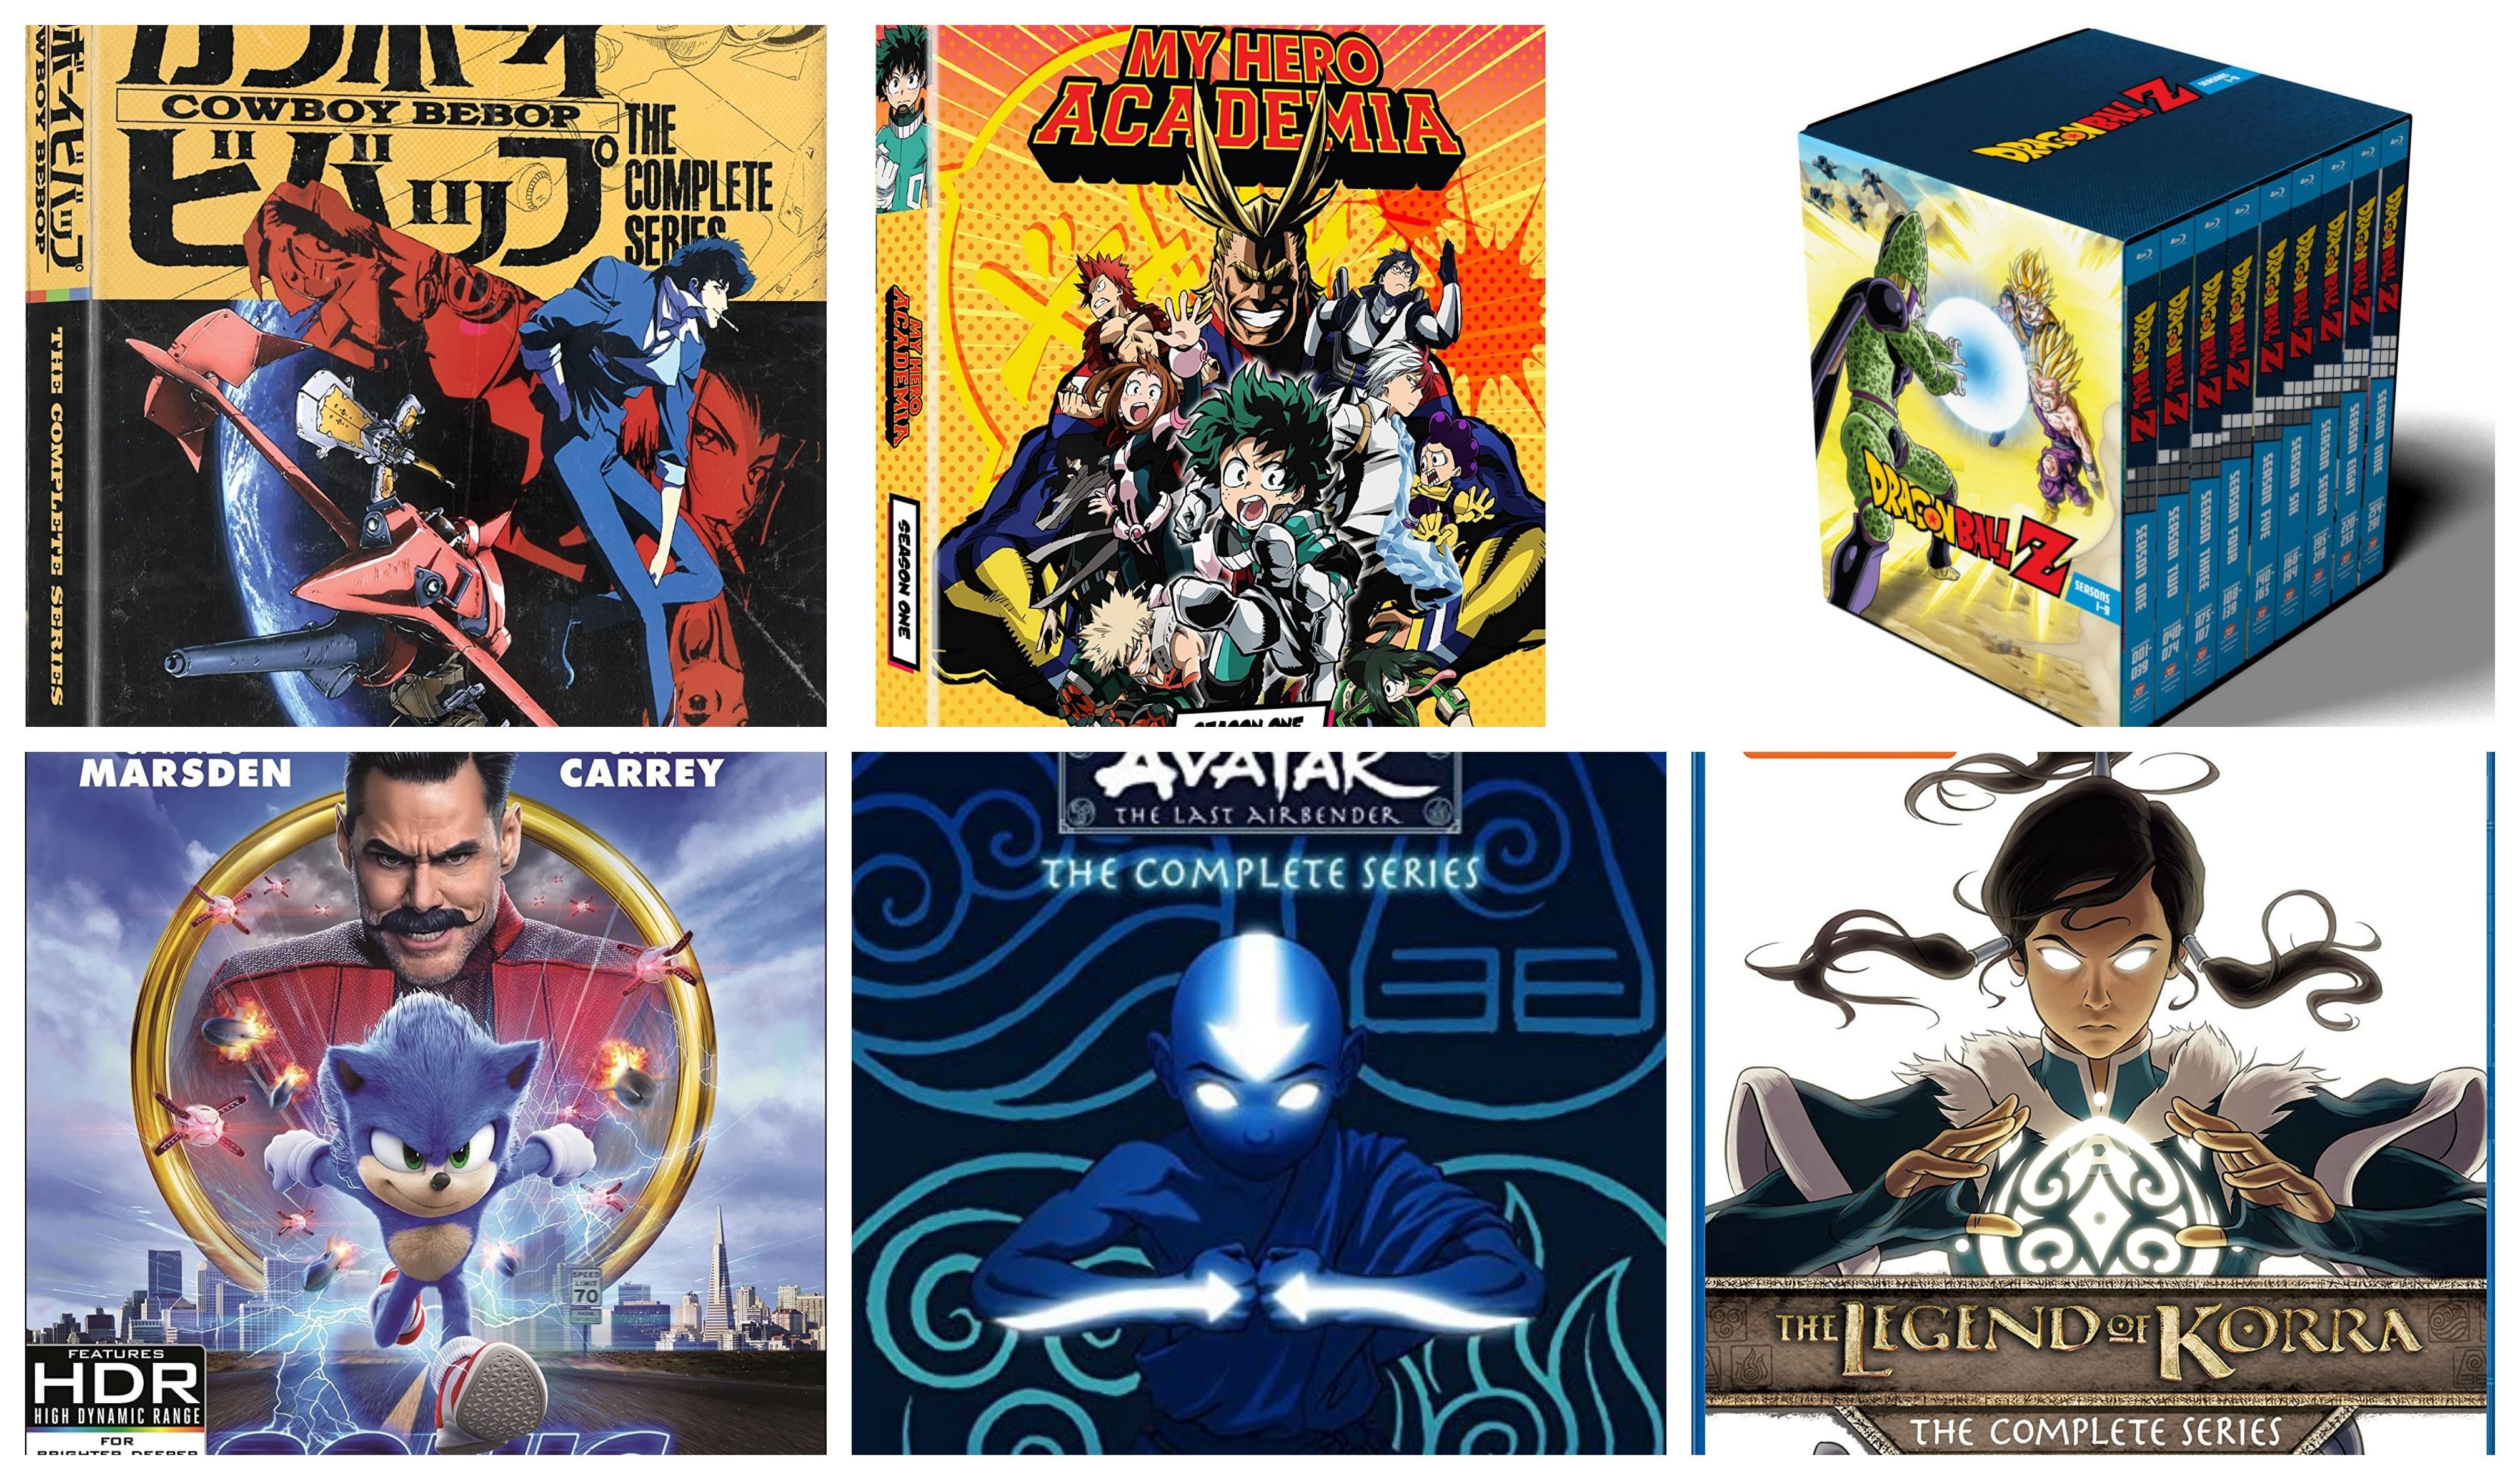 Amazon Prime Day Is Loaded With Anime Bluray Deals